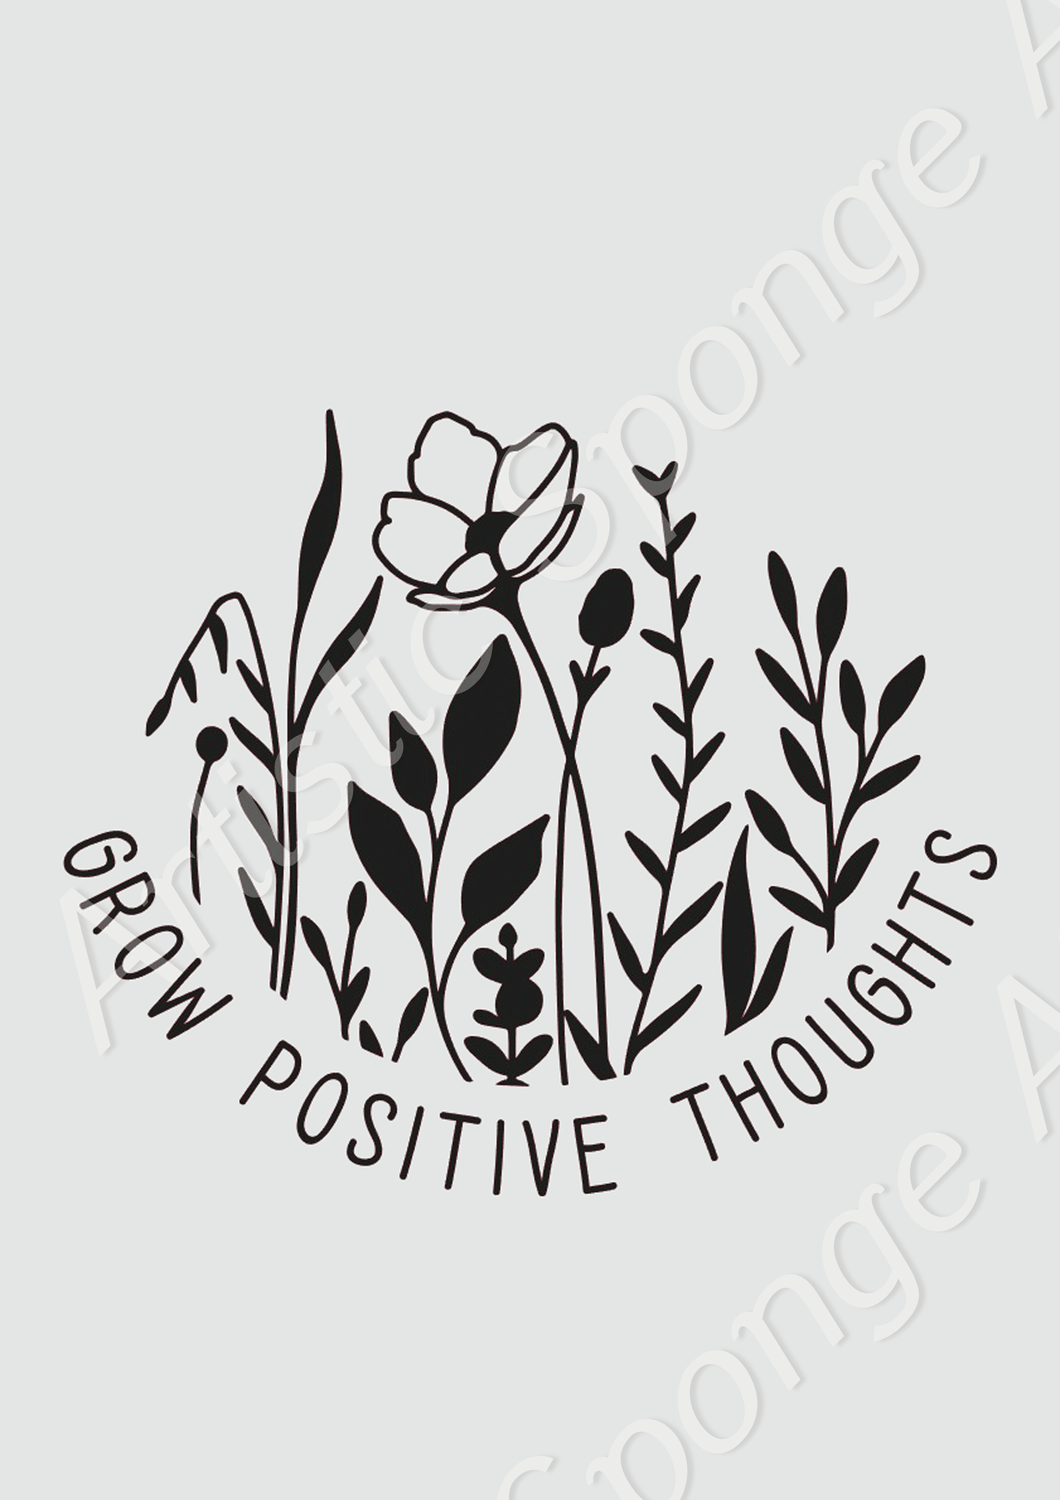 Grow Positive Thoughts Quote Reusable Stencil Sizes A5 A4 A3 & Larger Shabby Chic Craft Paint Wall Deco / Q89